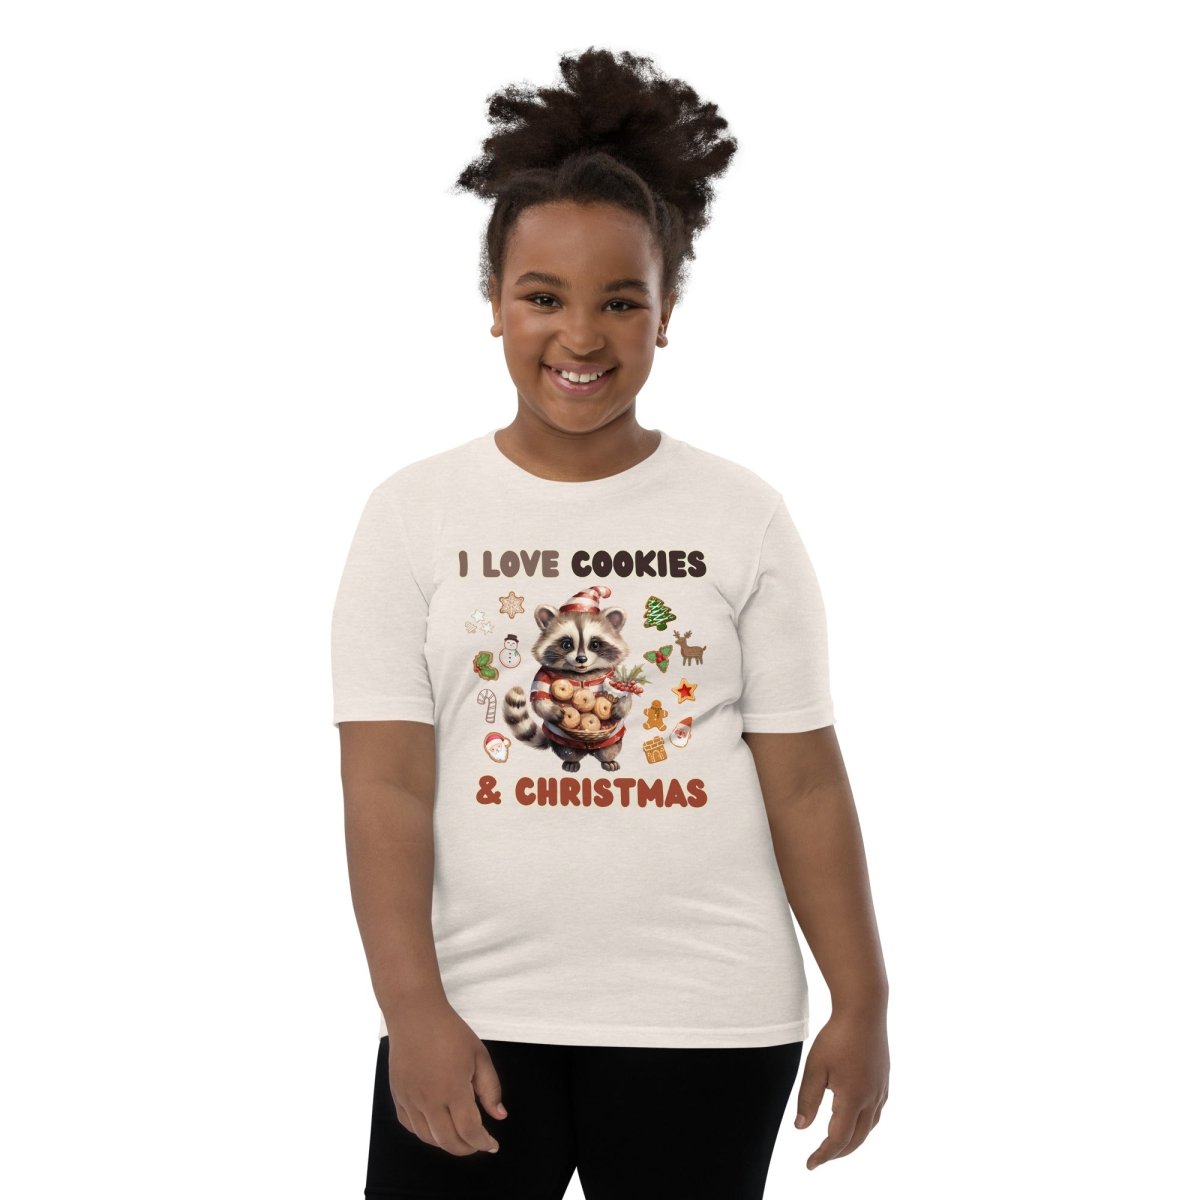 I love Christmas Cookies T-Shirt - High Quality Funny Teenager T-Shirt, Holiday Shirt, Youth Christmas Vacation Tee, Cute Raccoon Tee - Everything Pixel